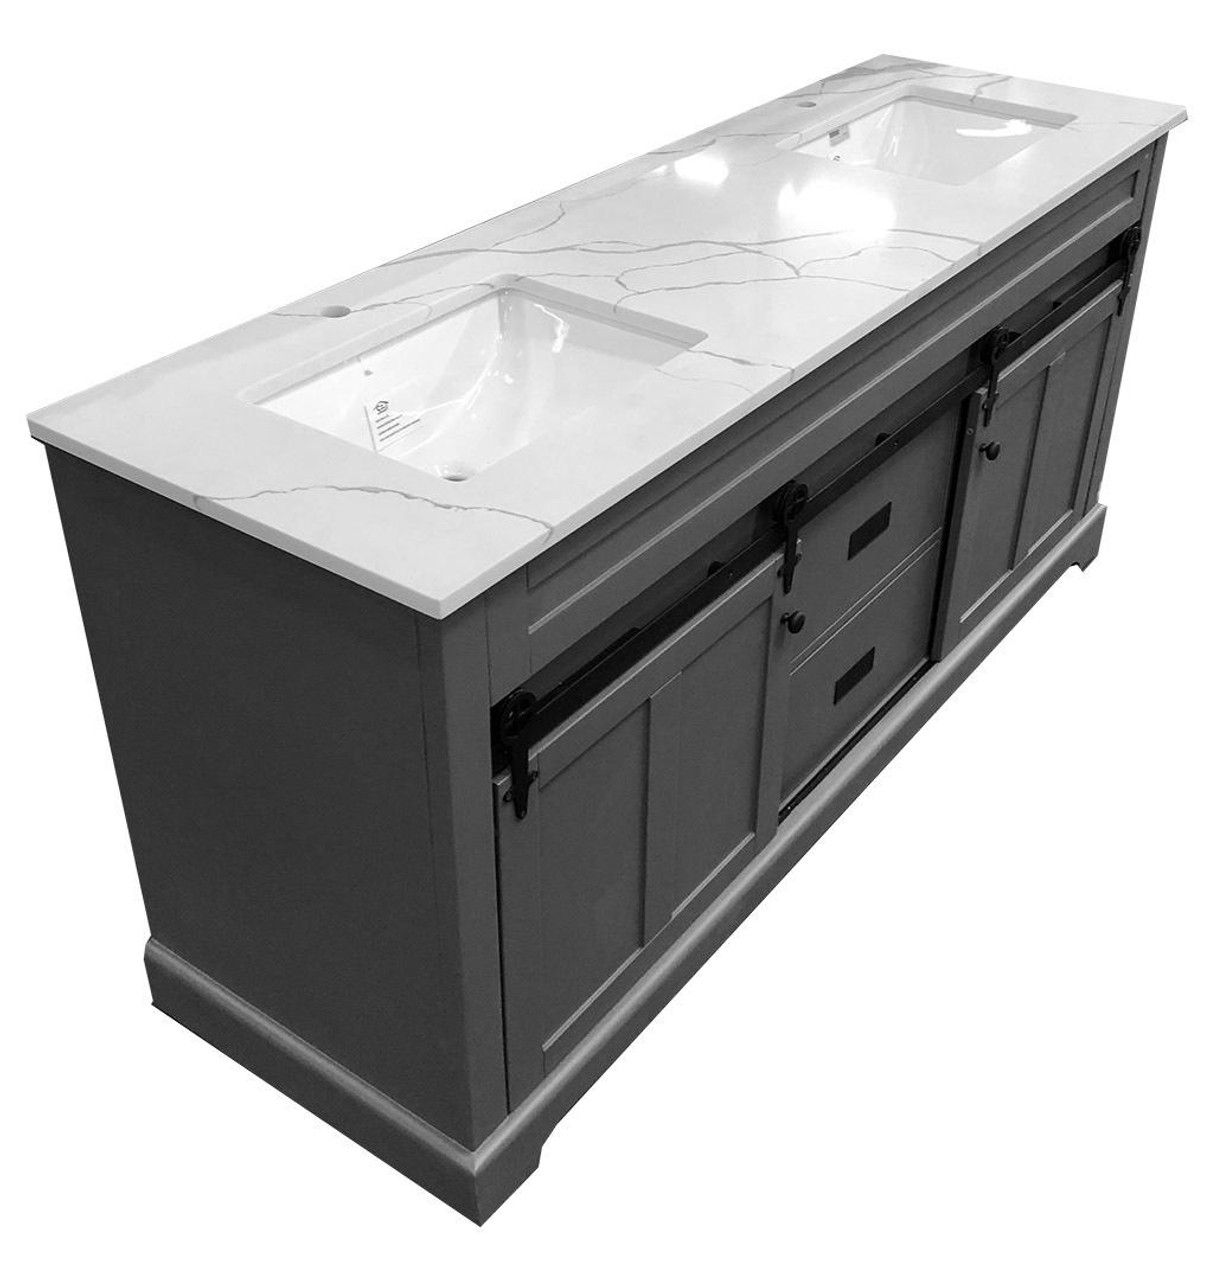 https://cdn11.bigcommerce.com/s-sryqni/images/stencil/1280x1280/products/19677/33360/sbm-farmhouse-72-in-double-sink-bathroom-vanity-in-grey-with-calacatta-gold-quartz-countertop__43661.1641837088.jpg?c=2